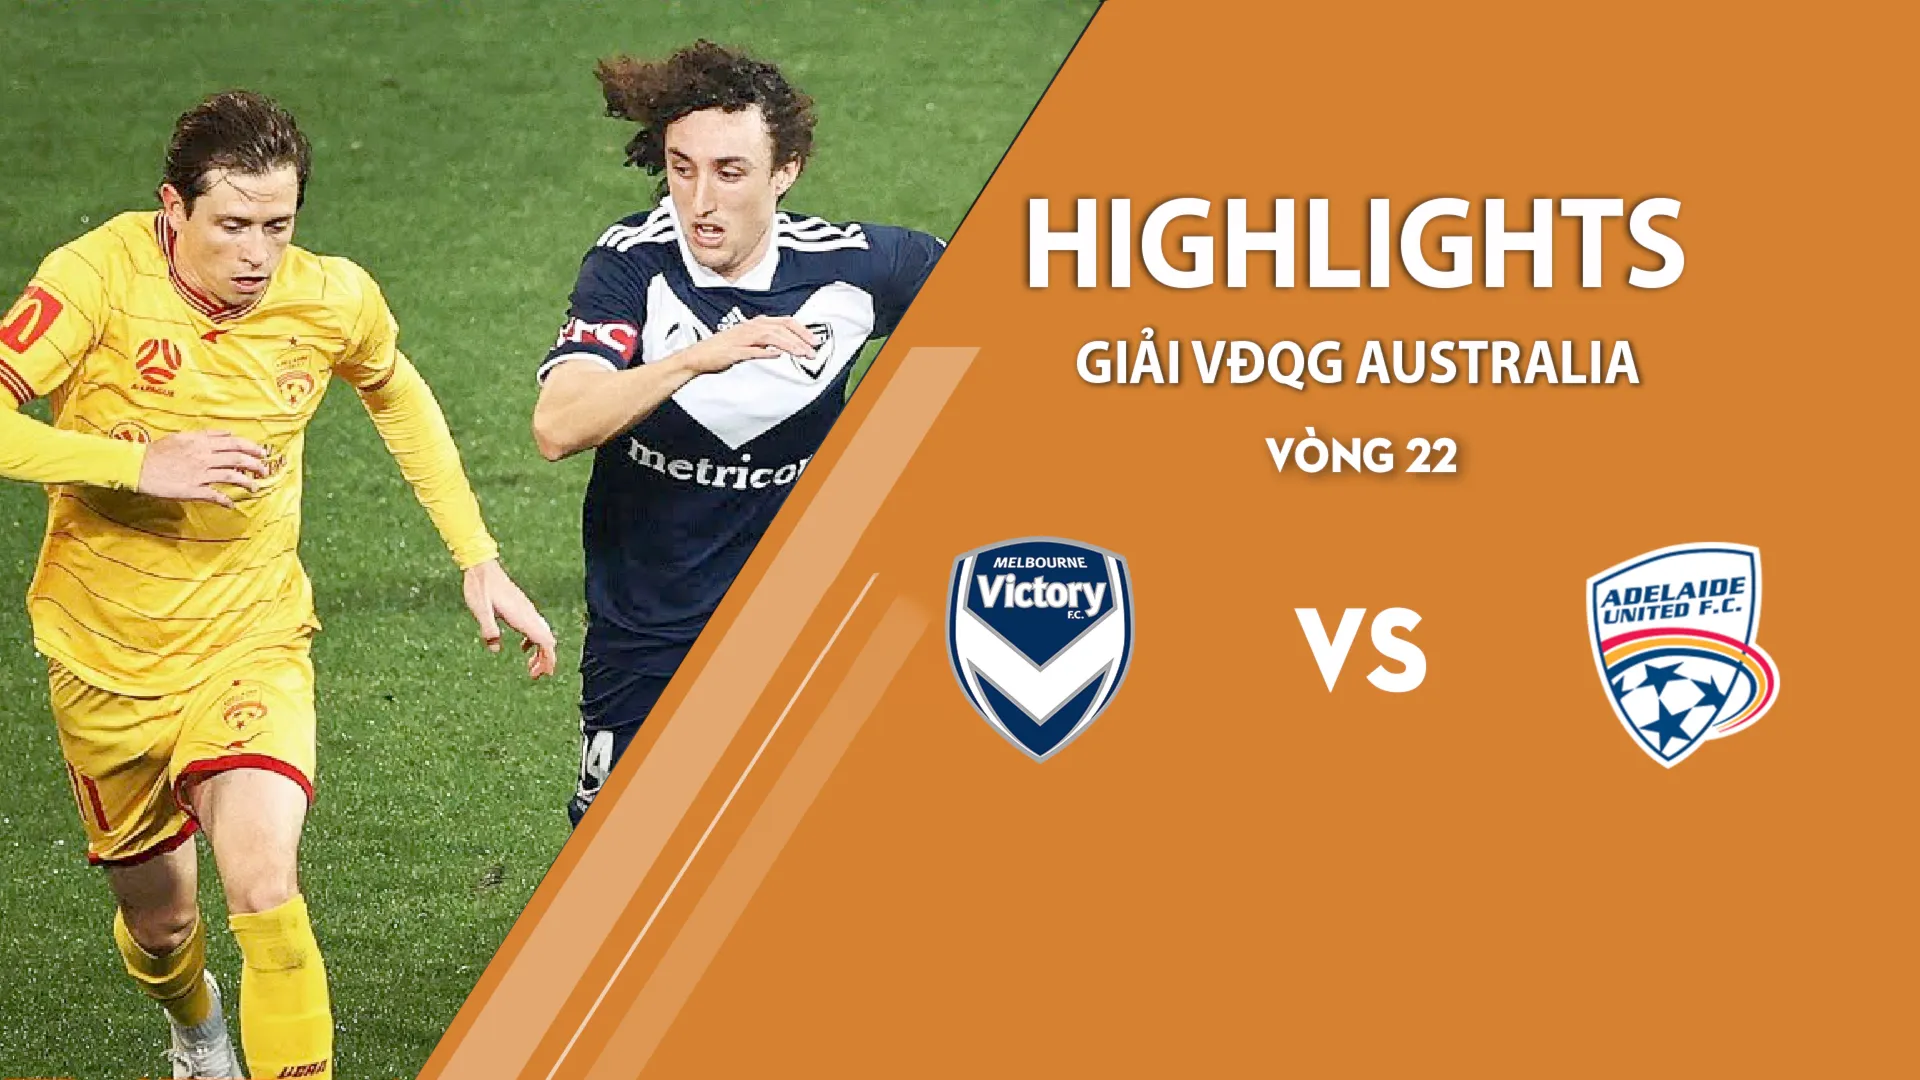 Highlights Melbourne Victory vs Adelaide United (vòng 22 giải A - League 2020/21)